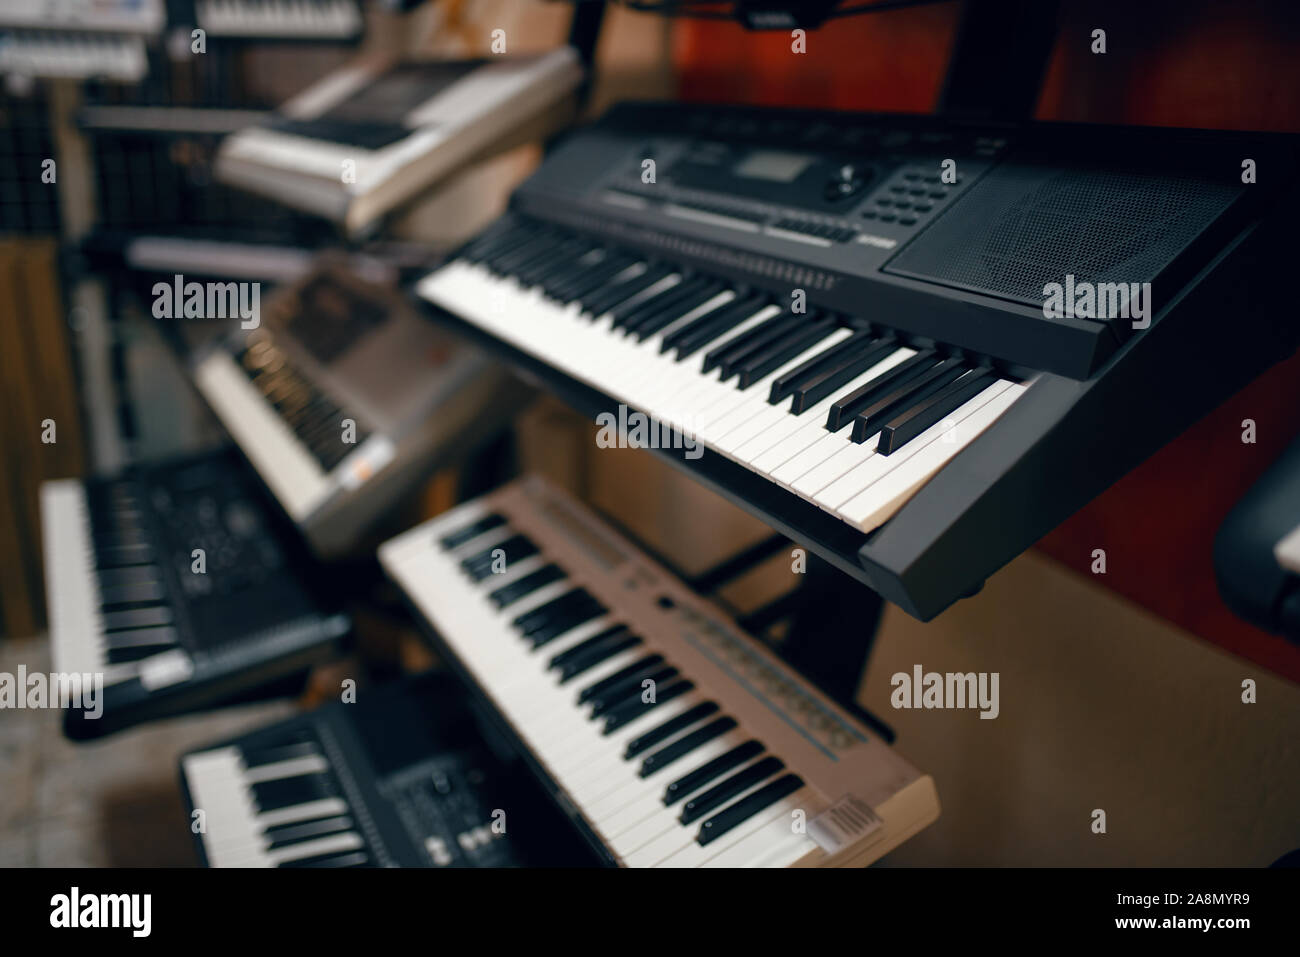 Digital synthesizers on showcase in music store Stock Photo